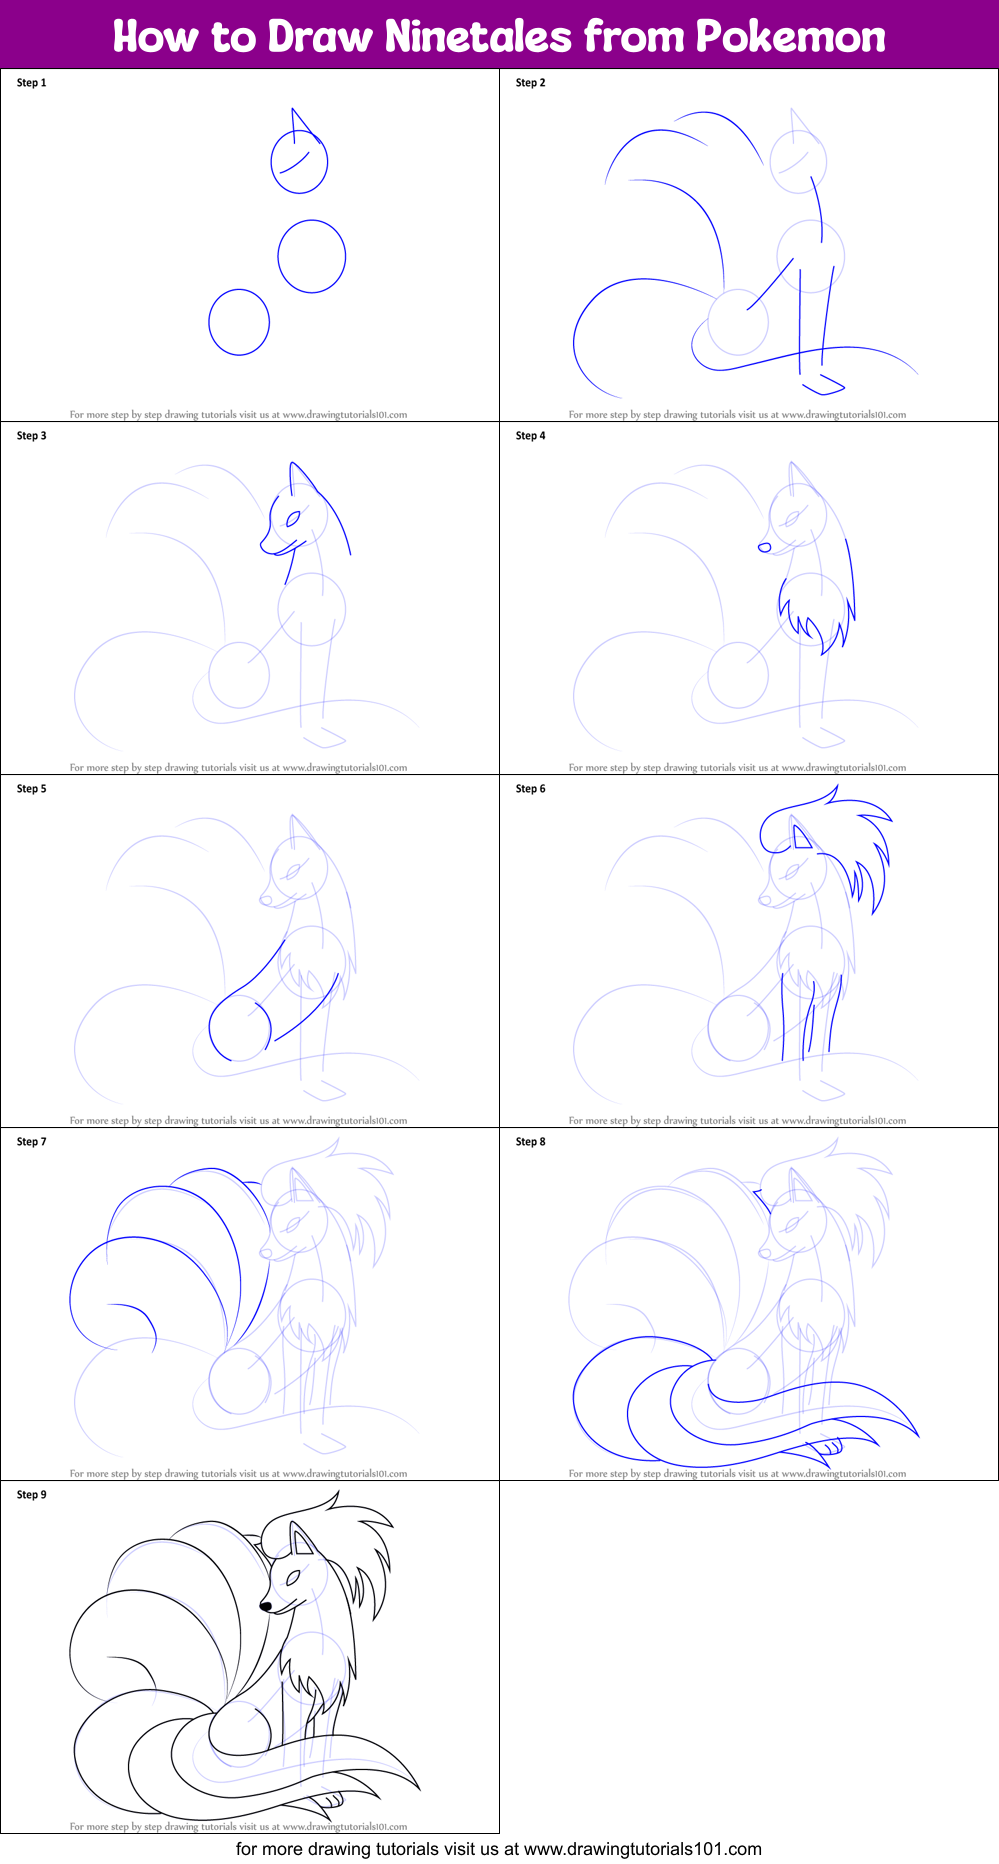 How to Draw Ninetales from Pokemon printable step by step drawing sheet